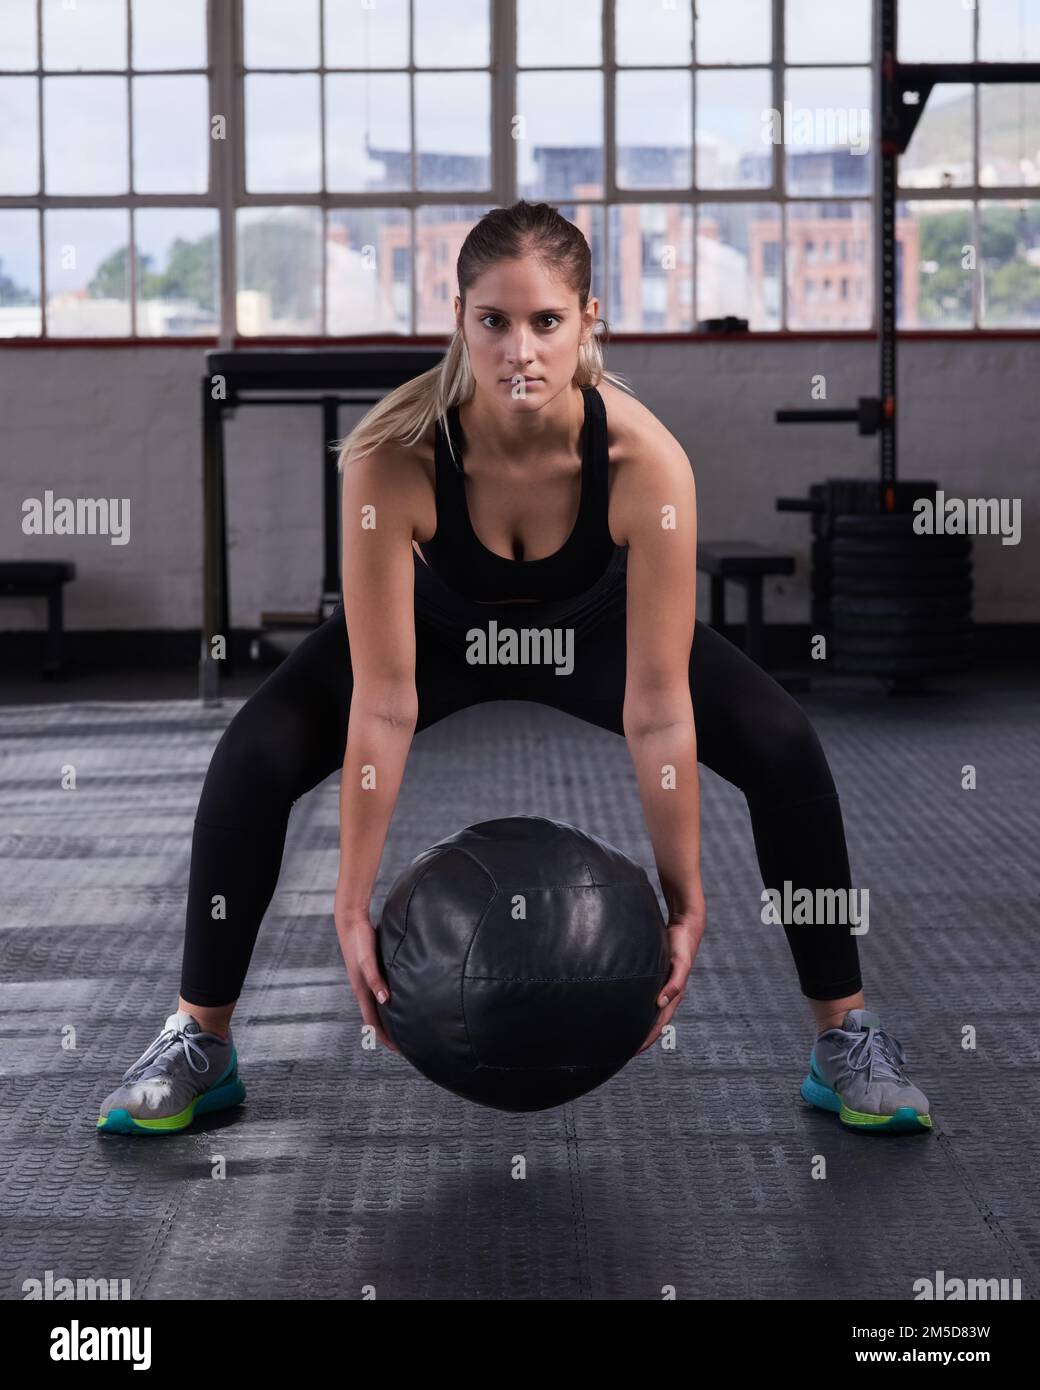 Small changes add up to big changes over time. a young woman using a medicine ball in an exercise routine. Stock Photo